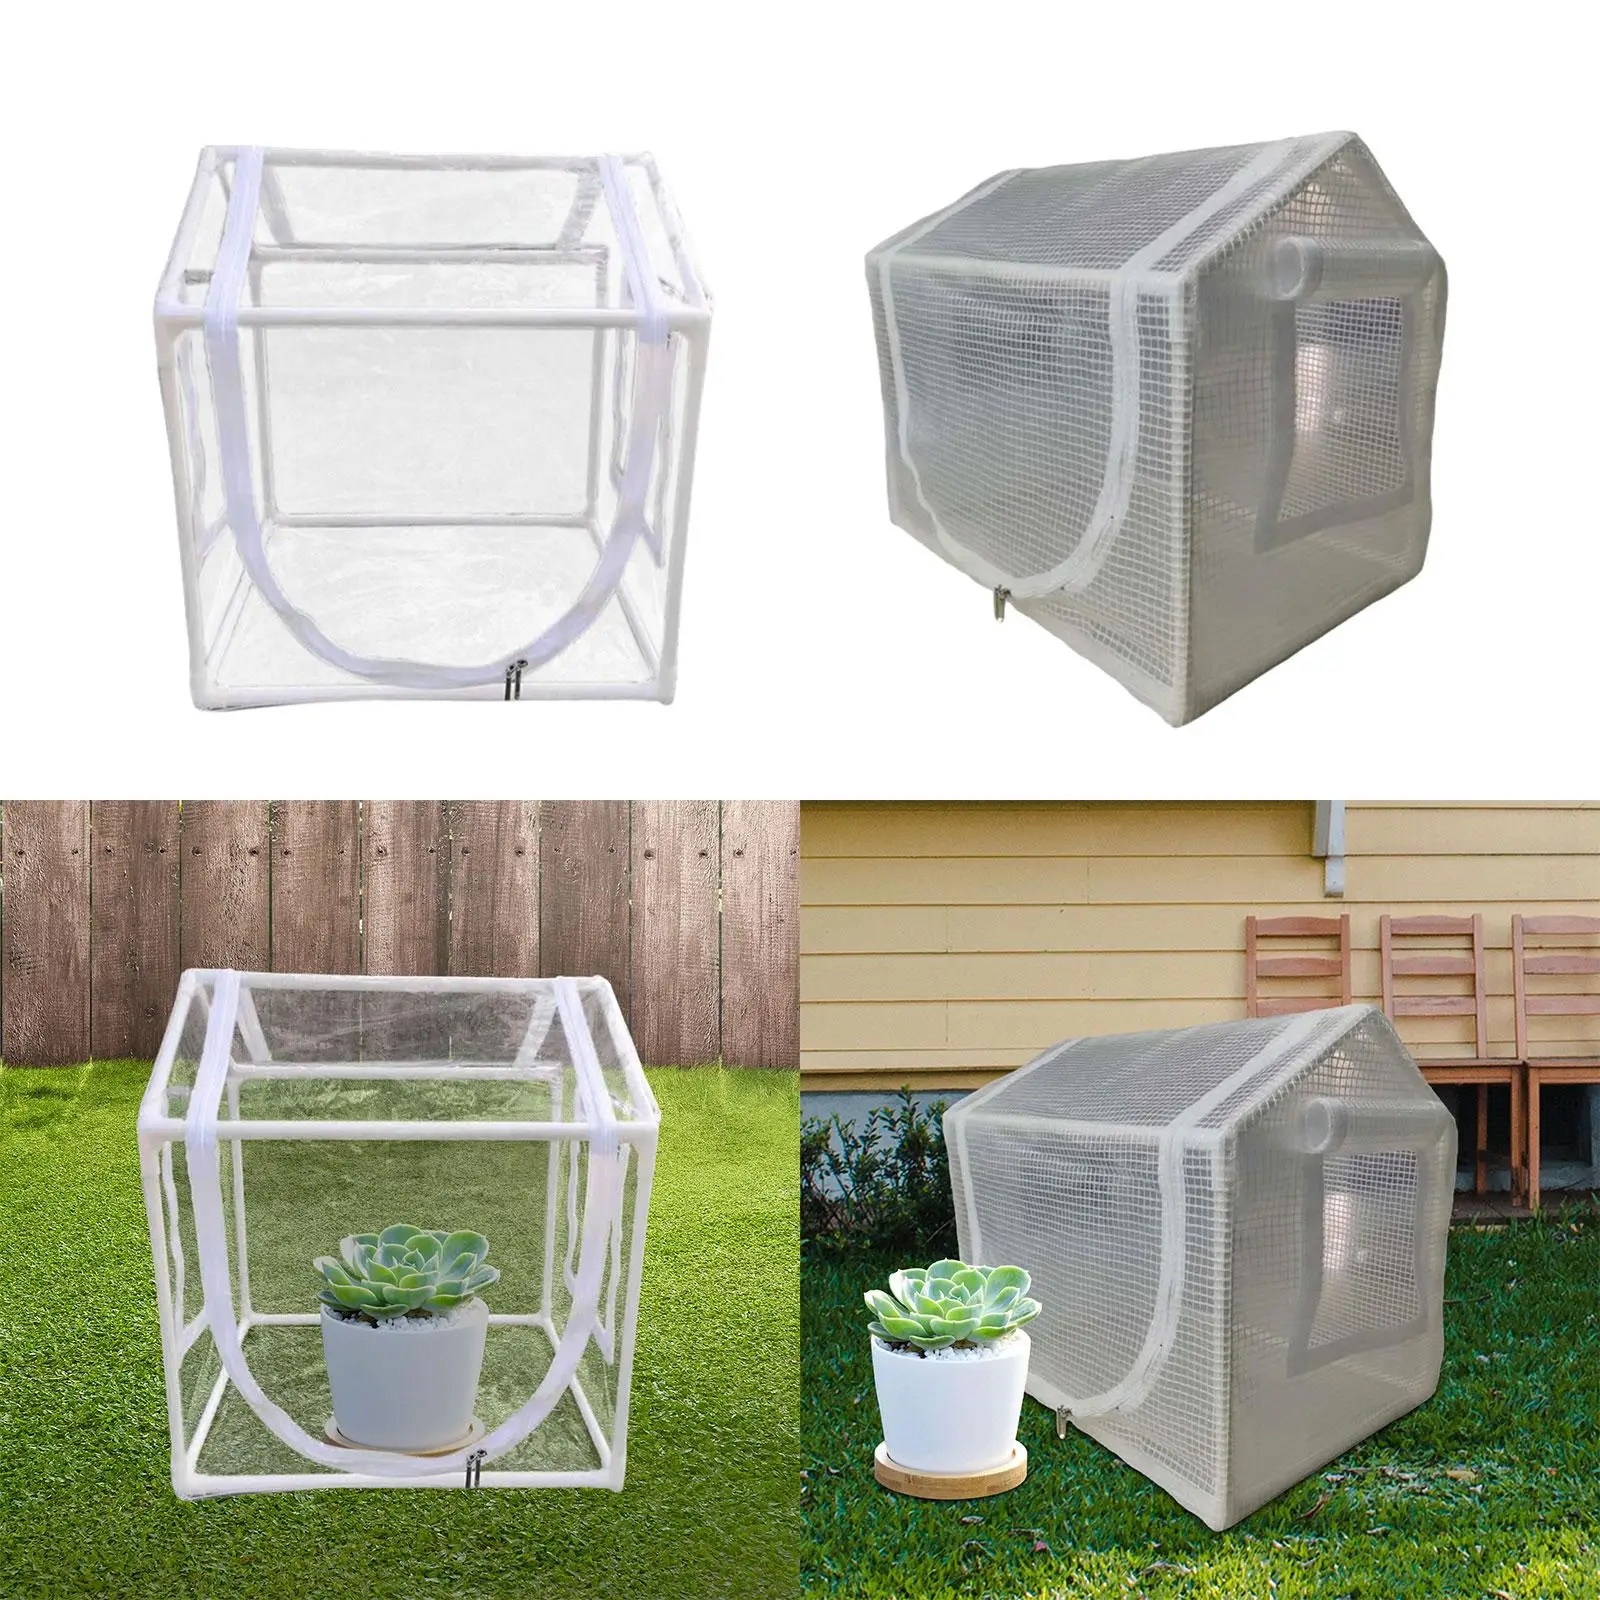 Still Air Box Yards Vegetable Easy to Use PVC Balconies Folding Greenhouse Easy Storage with Sturdy Frame Greenhouse